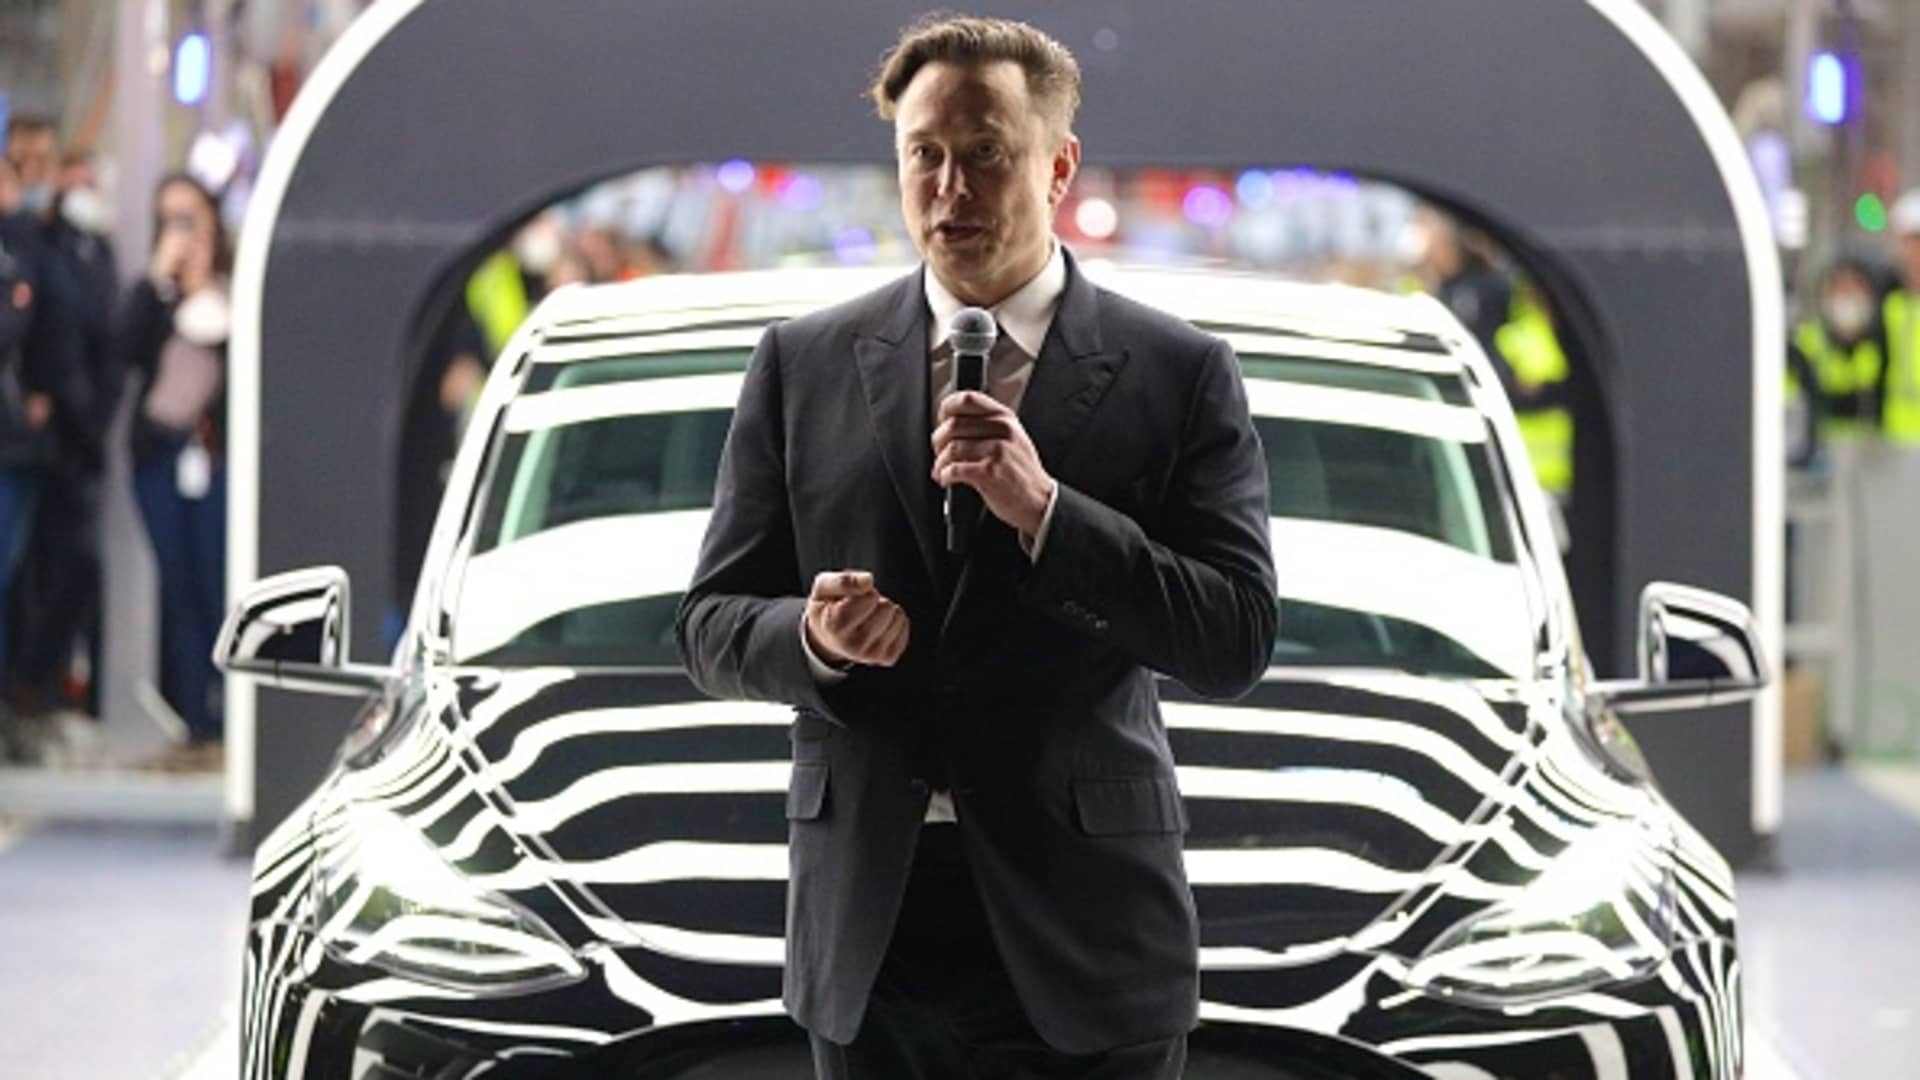 Stocks making the biggest moves in the premarket: Tesla, Ford Motor, Goldman Sachs and more